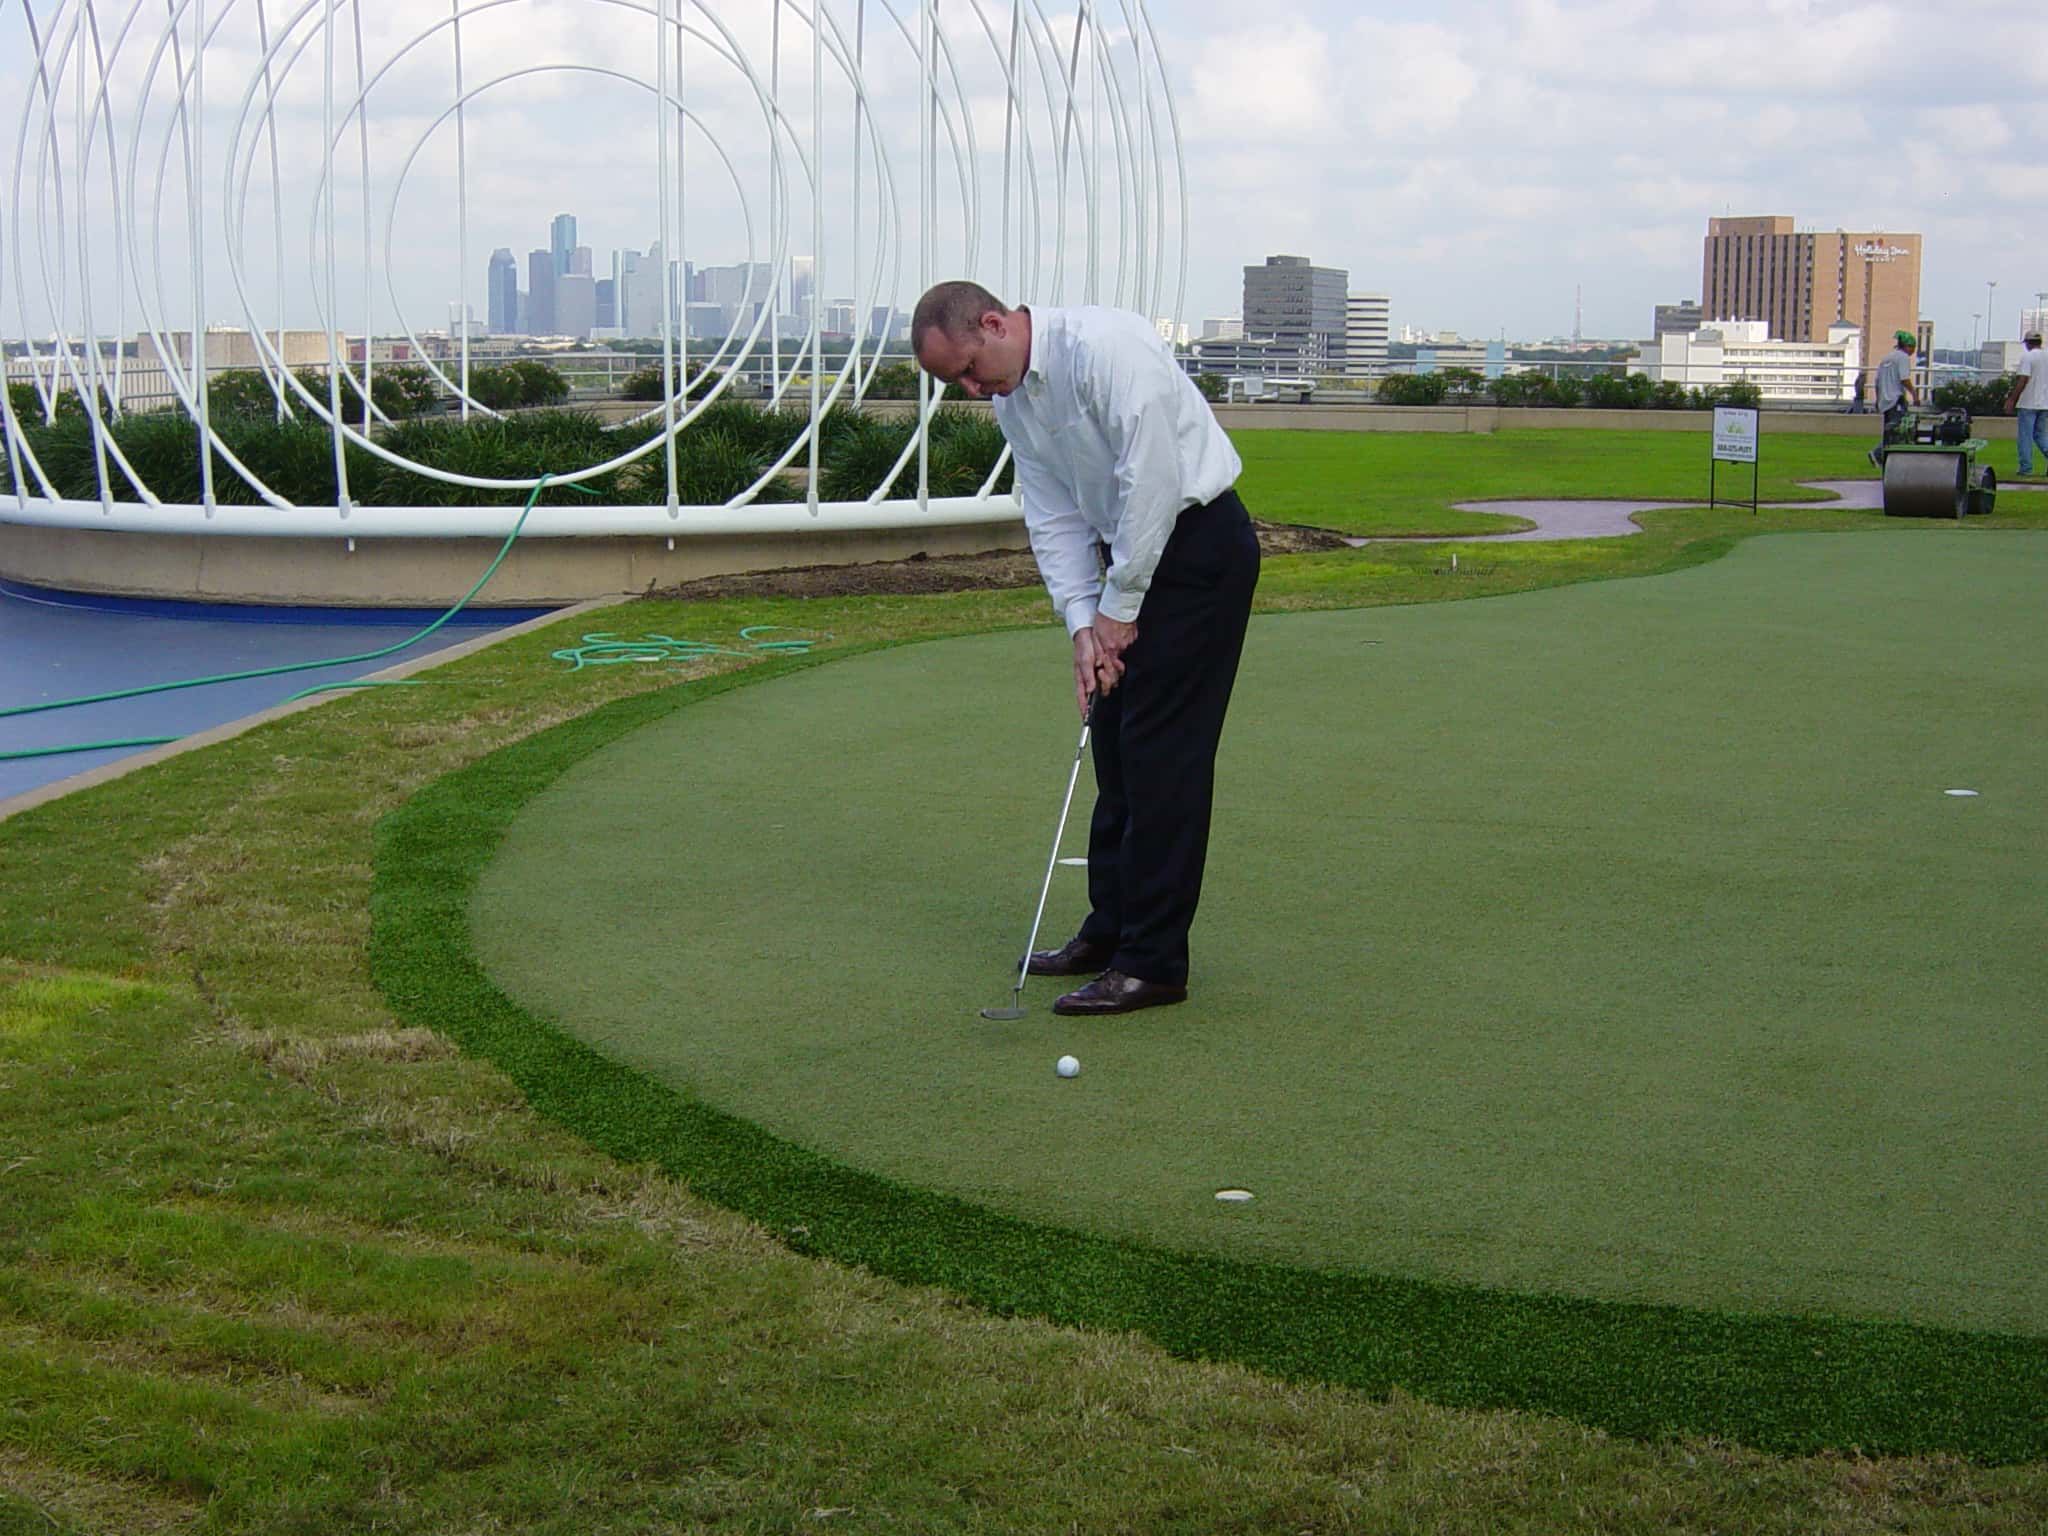 2000-sq.-ft.-chipping-putting-green-on-9th-floor-roof-of-Phoenix-Tower.-Houston.jpg